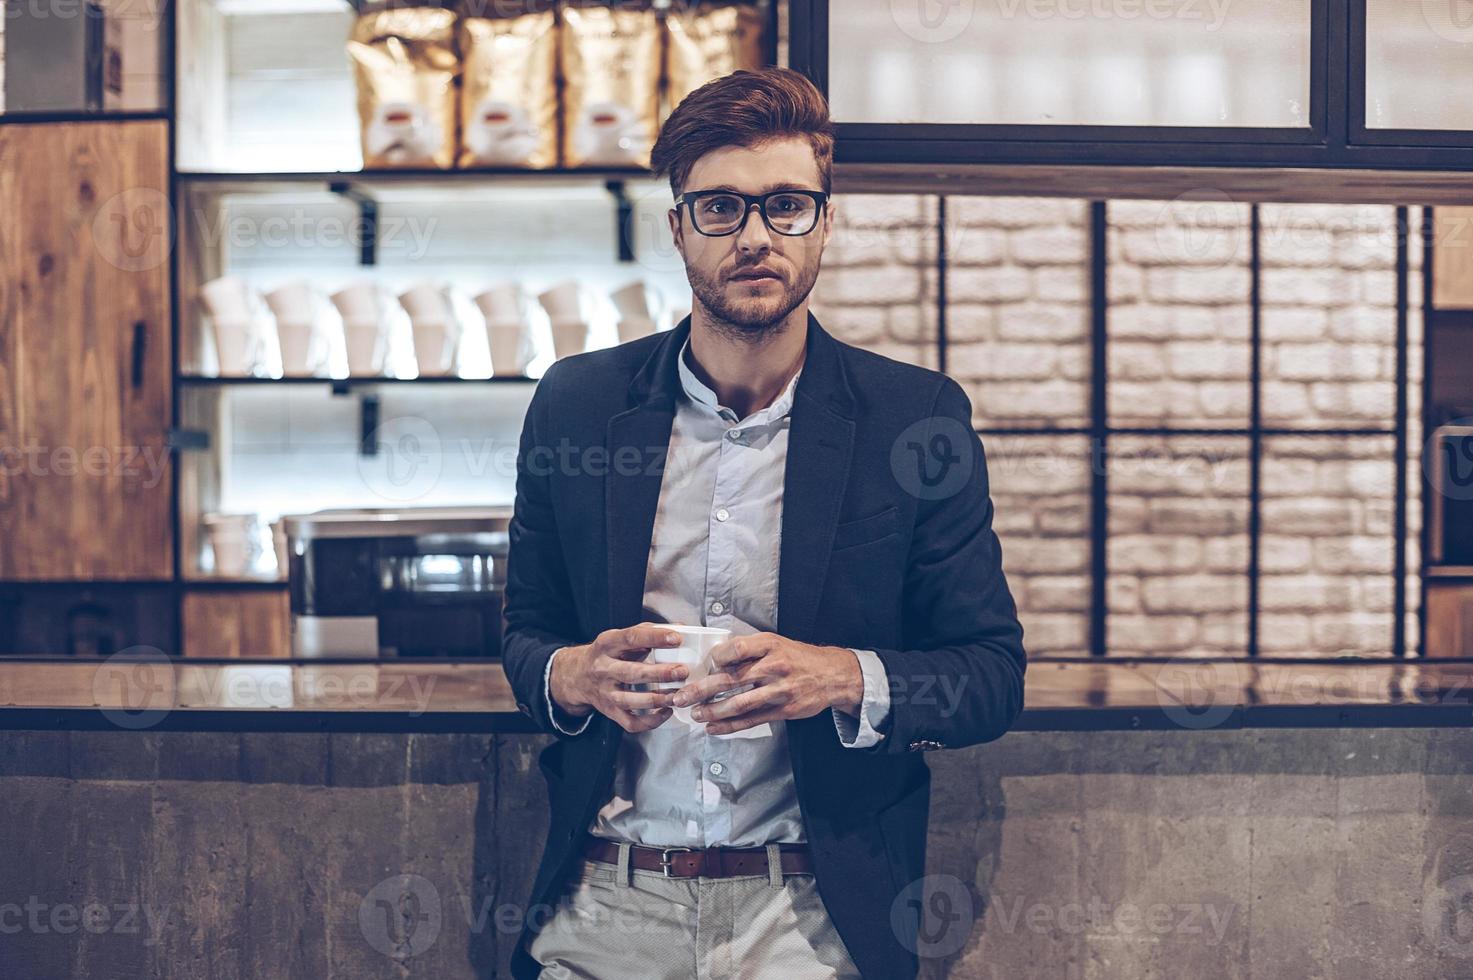 Starting his small business. Young handsome man in glasses holding coffee cup and looking at camera while standing at bar counter photo